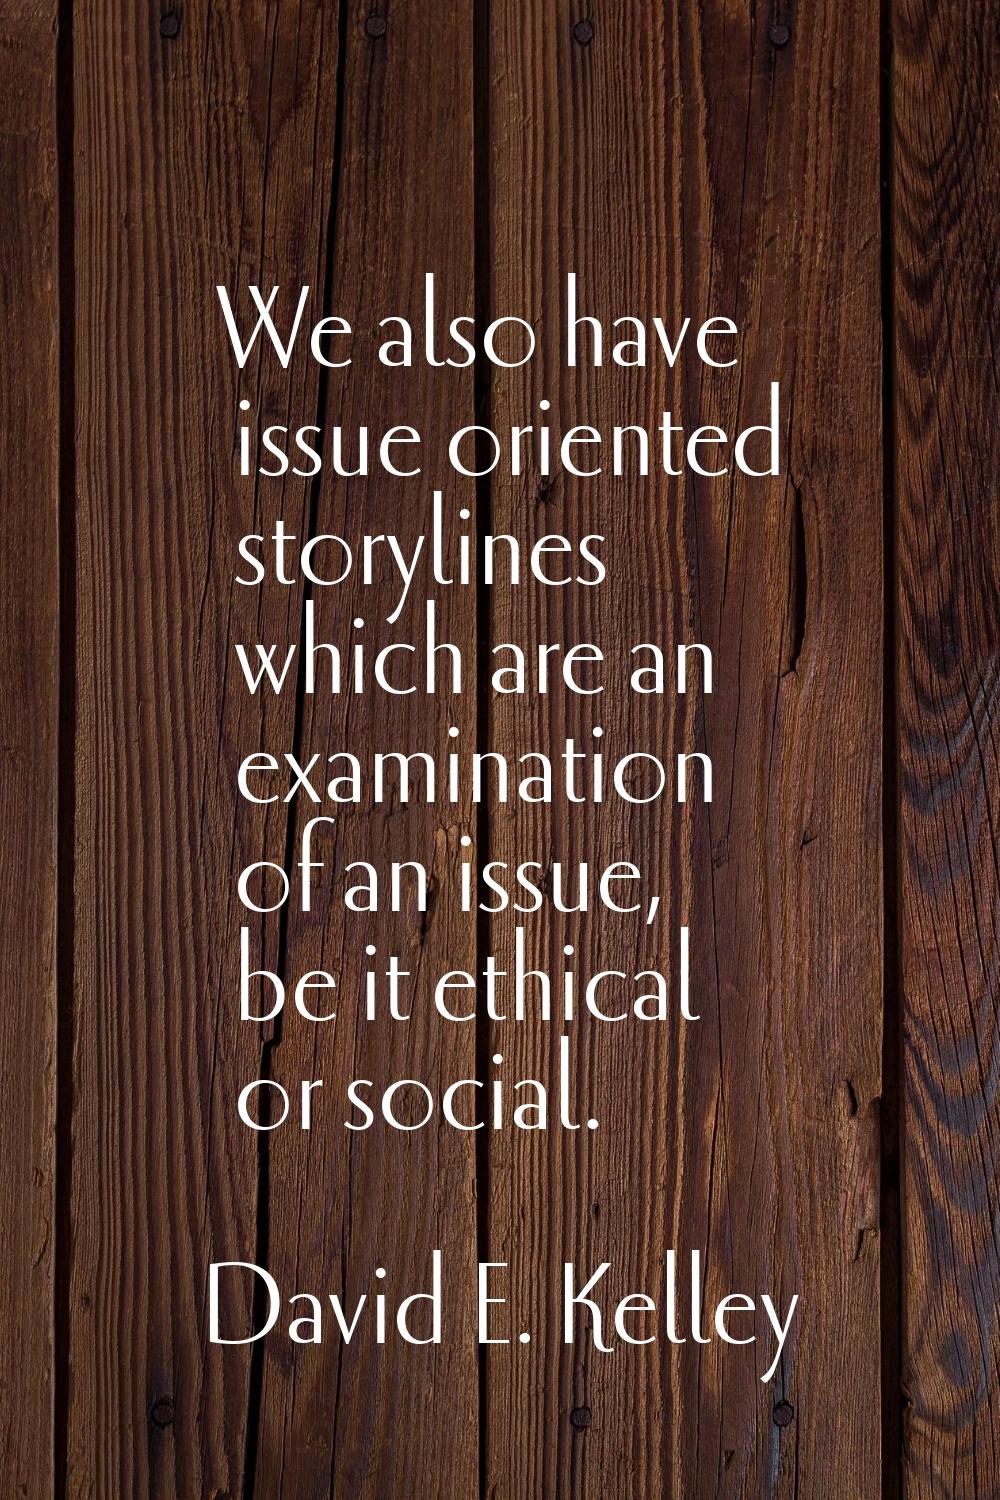 We also have issue oriented storylines which are an examination of an issue, be it ethical or socia